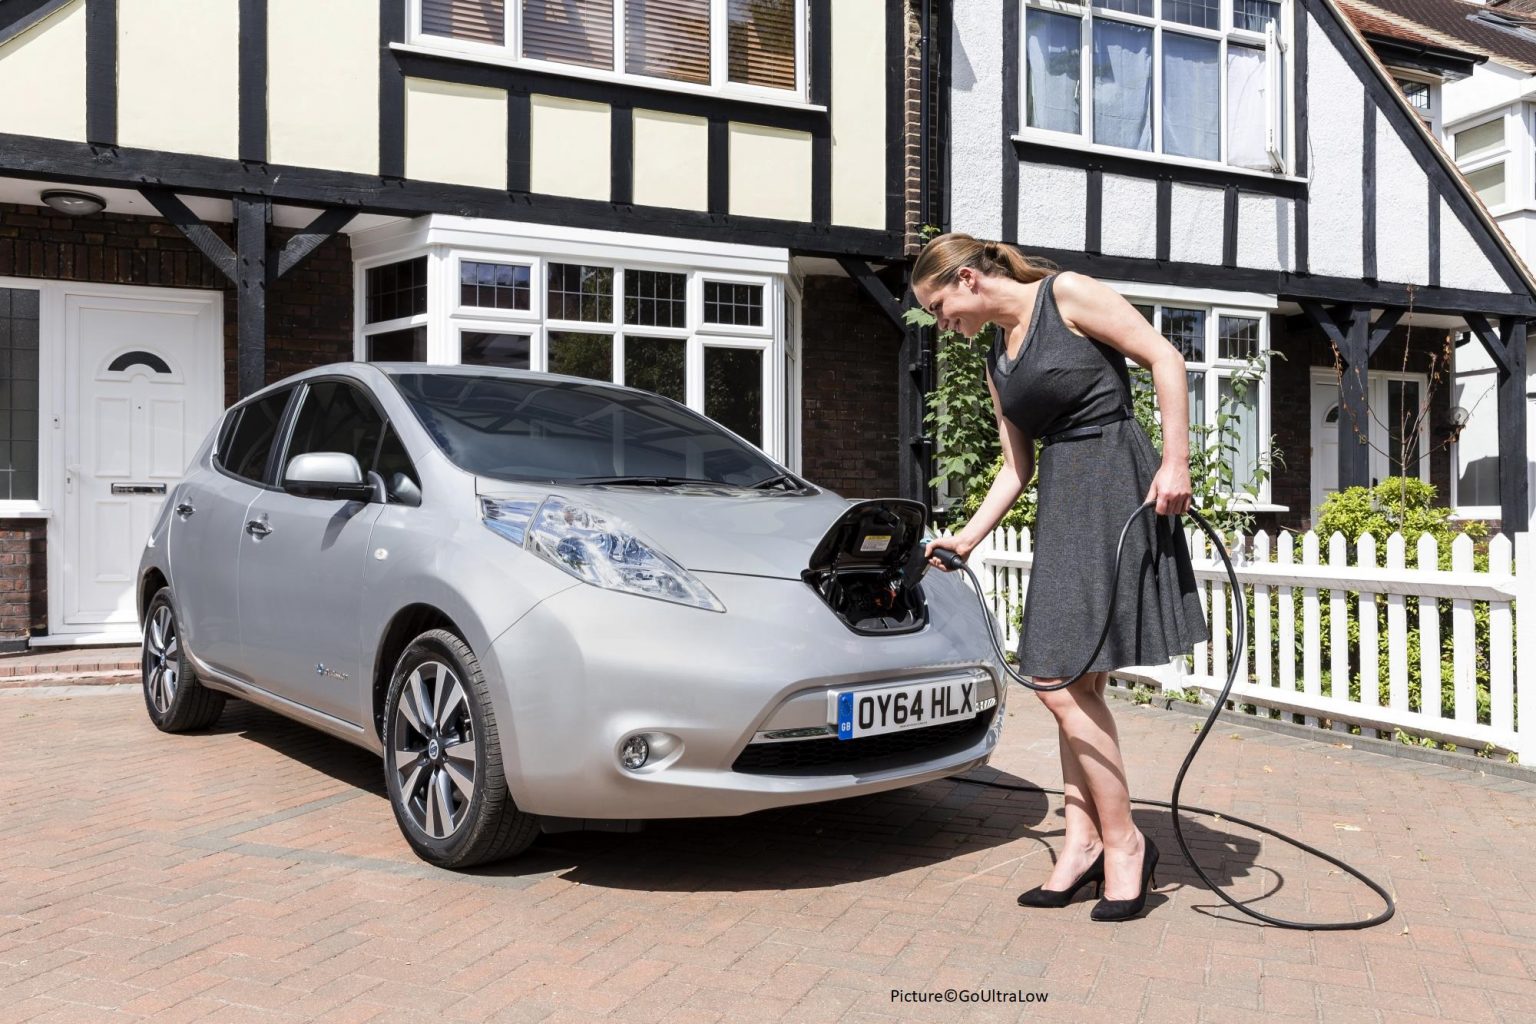 Are electric car charging cables really being stolen? Ask the Car Expert